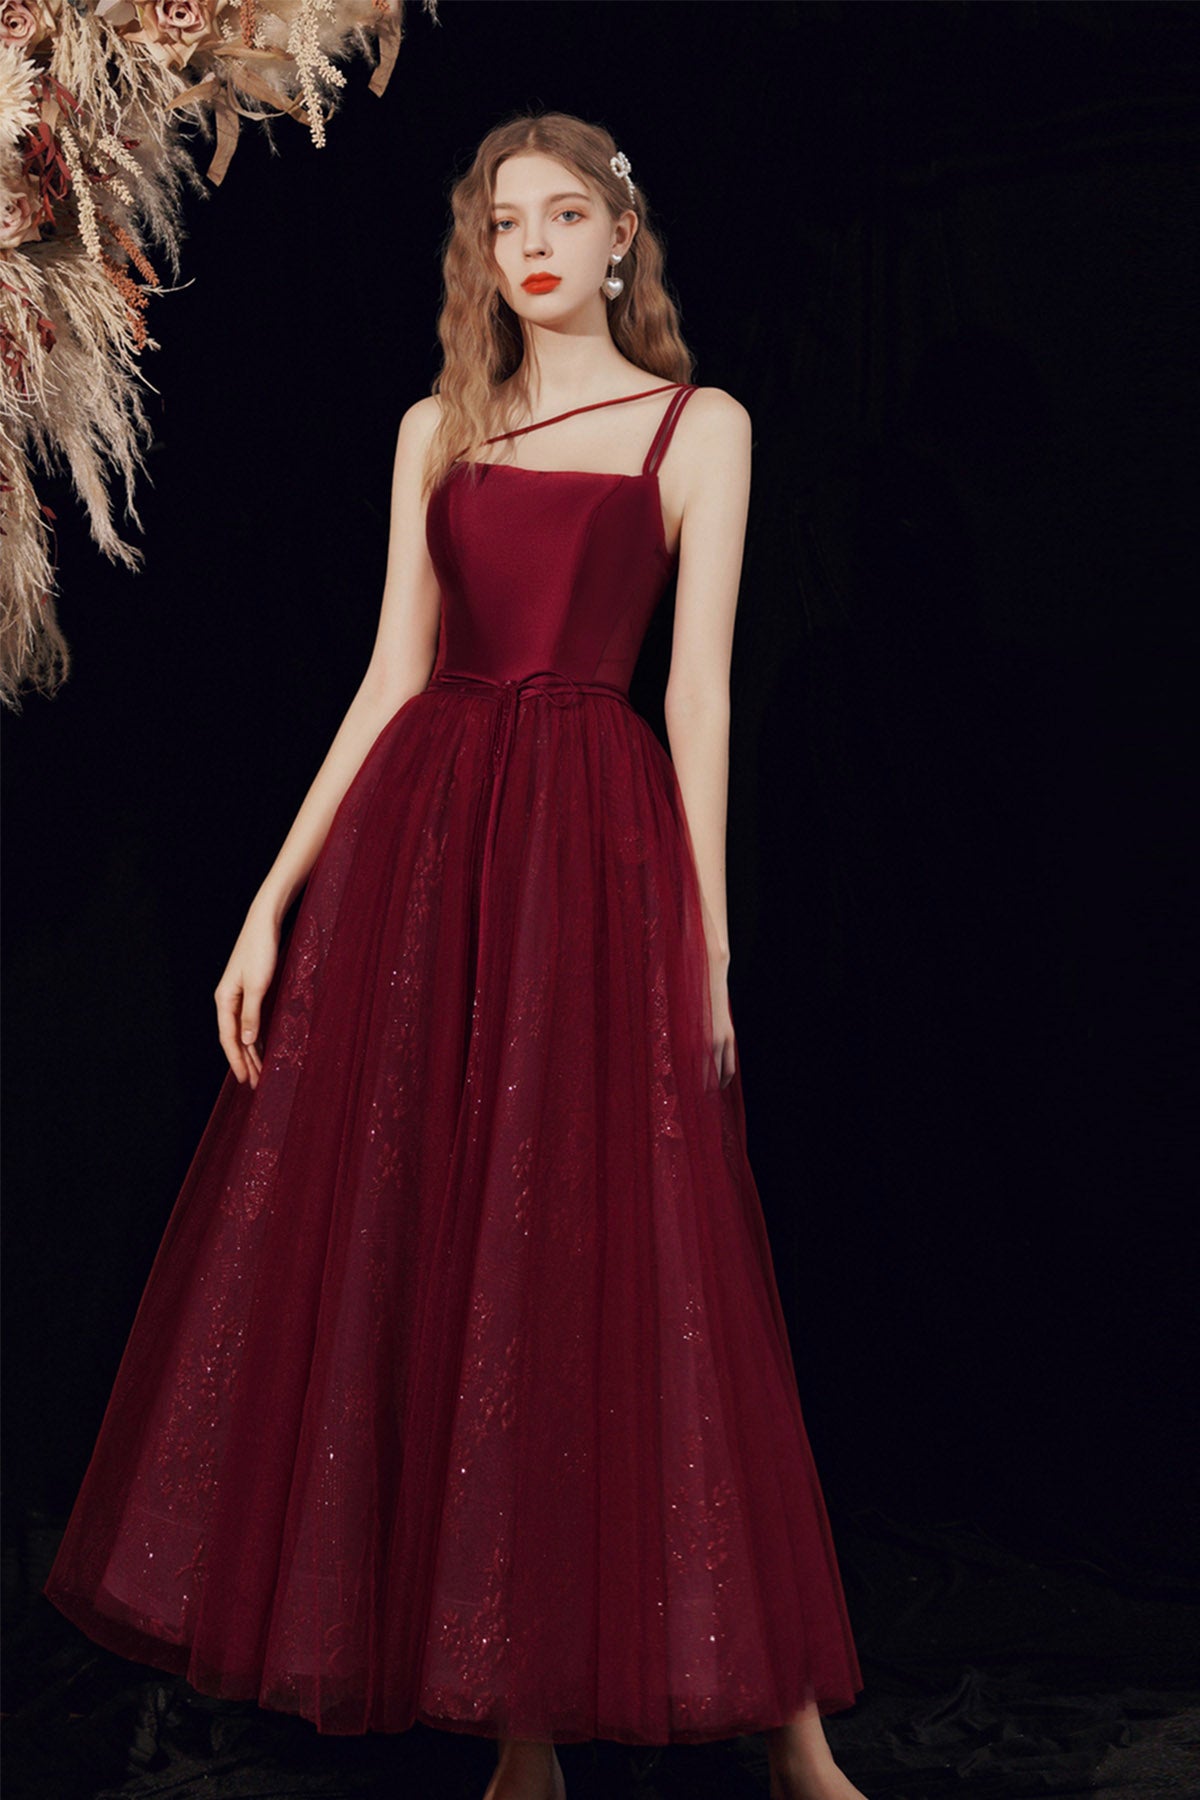 Spaghetti Straps Tulle Long Prom Dress, Burgundy Evening Party Dress